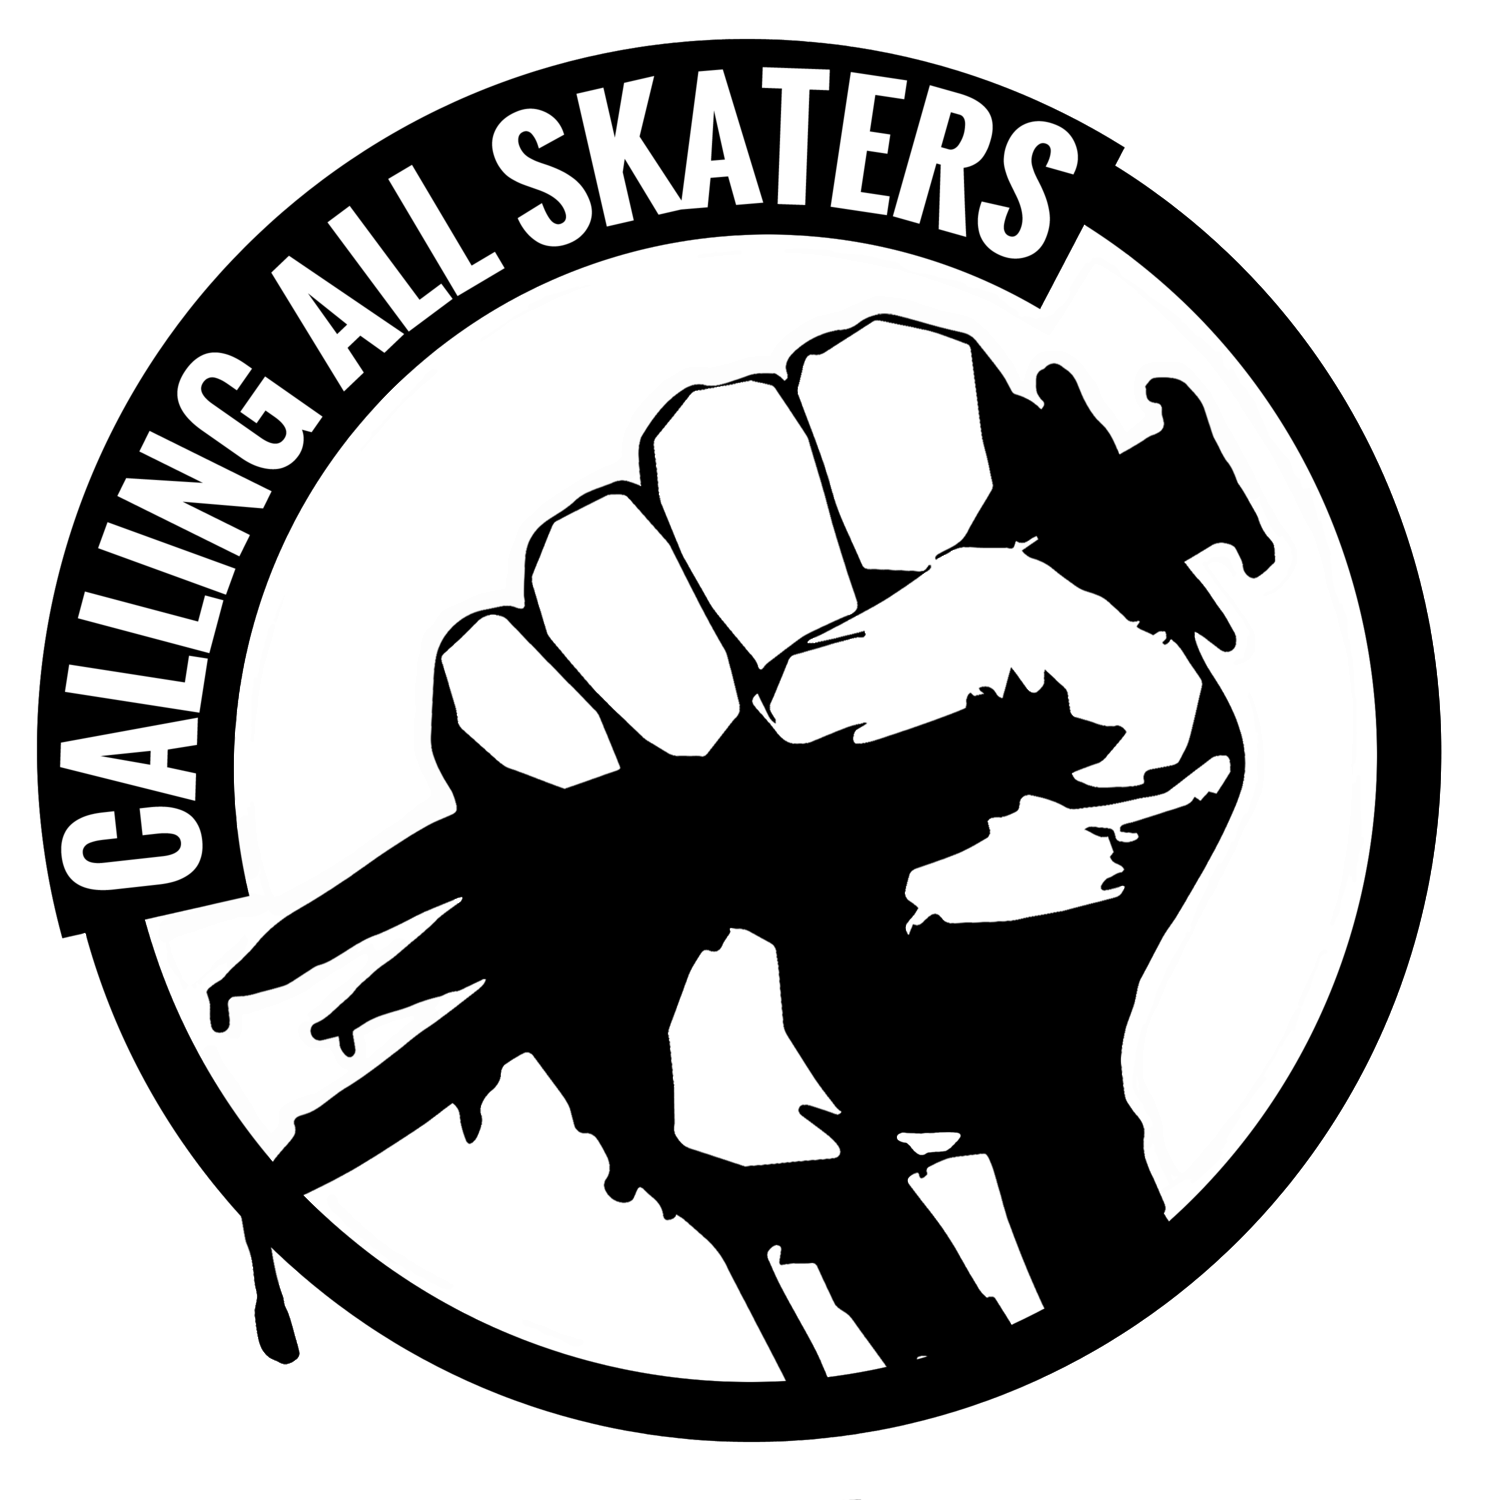 CALLING ALL SKATERS